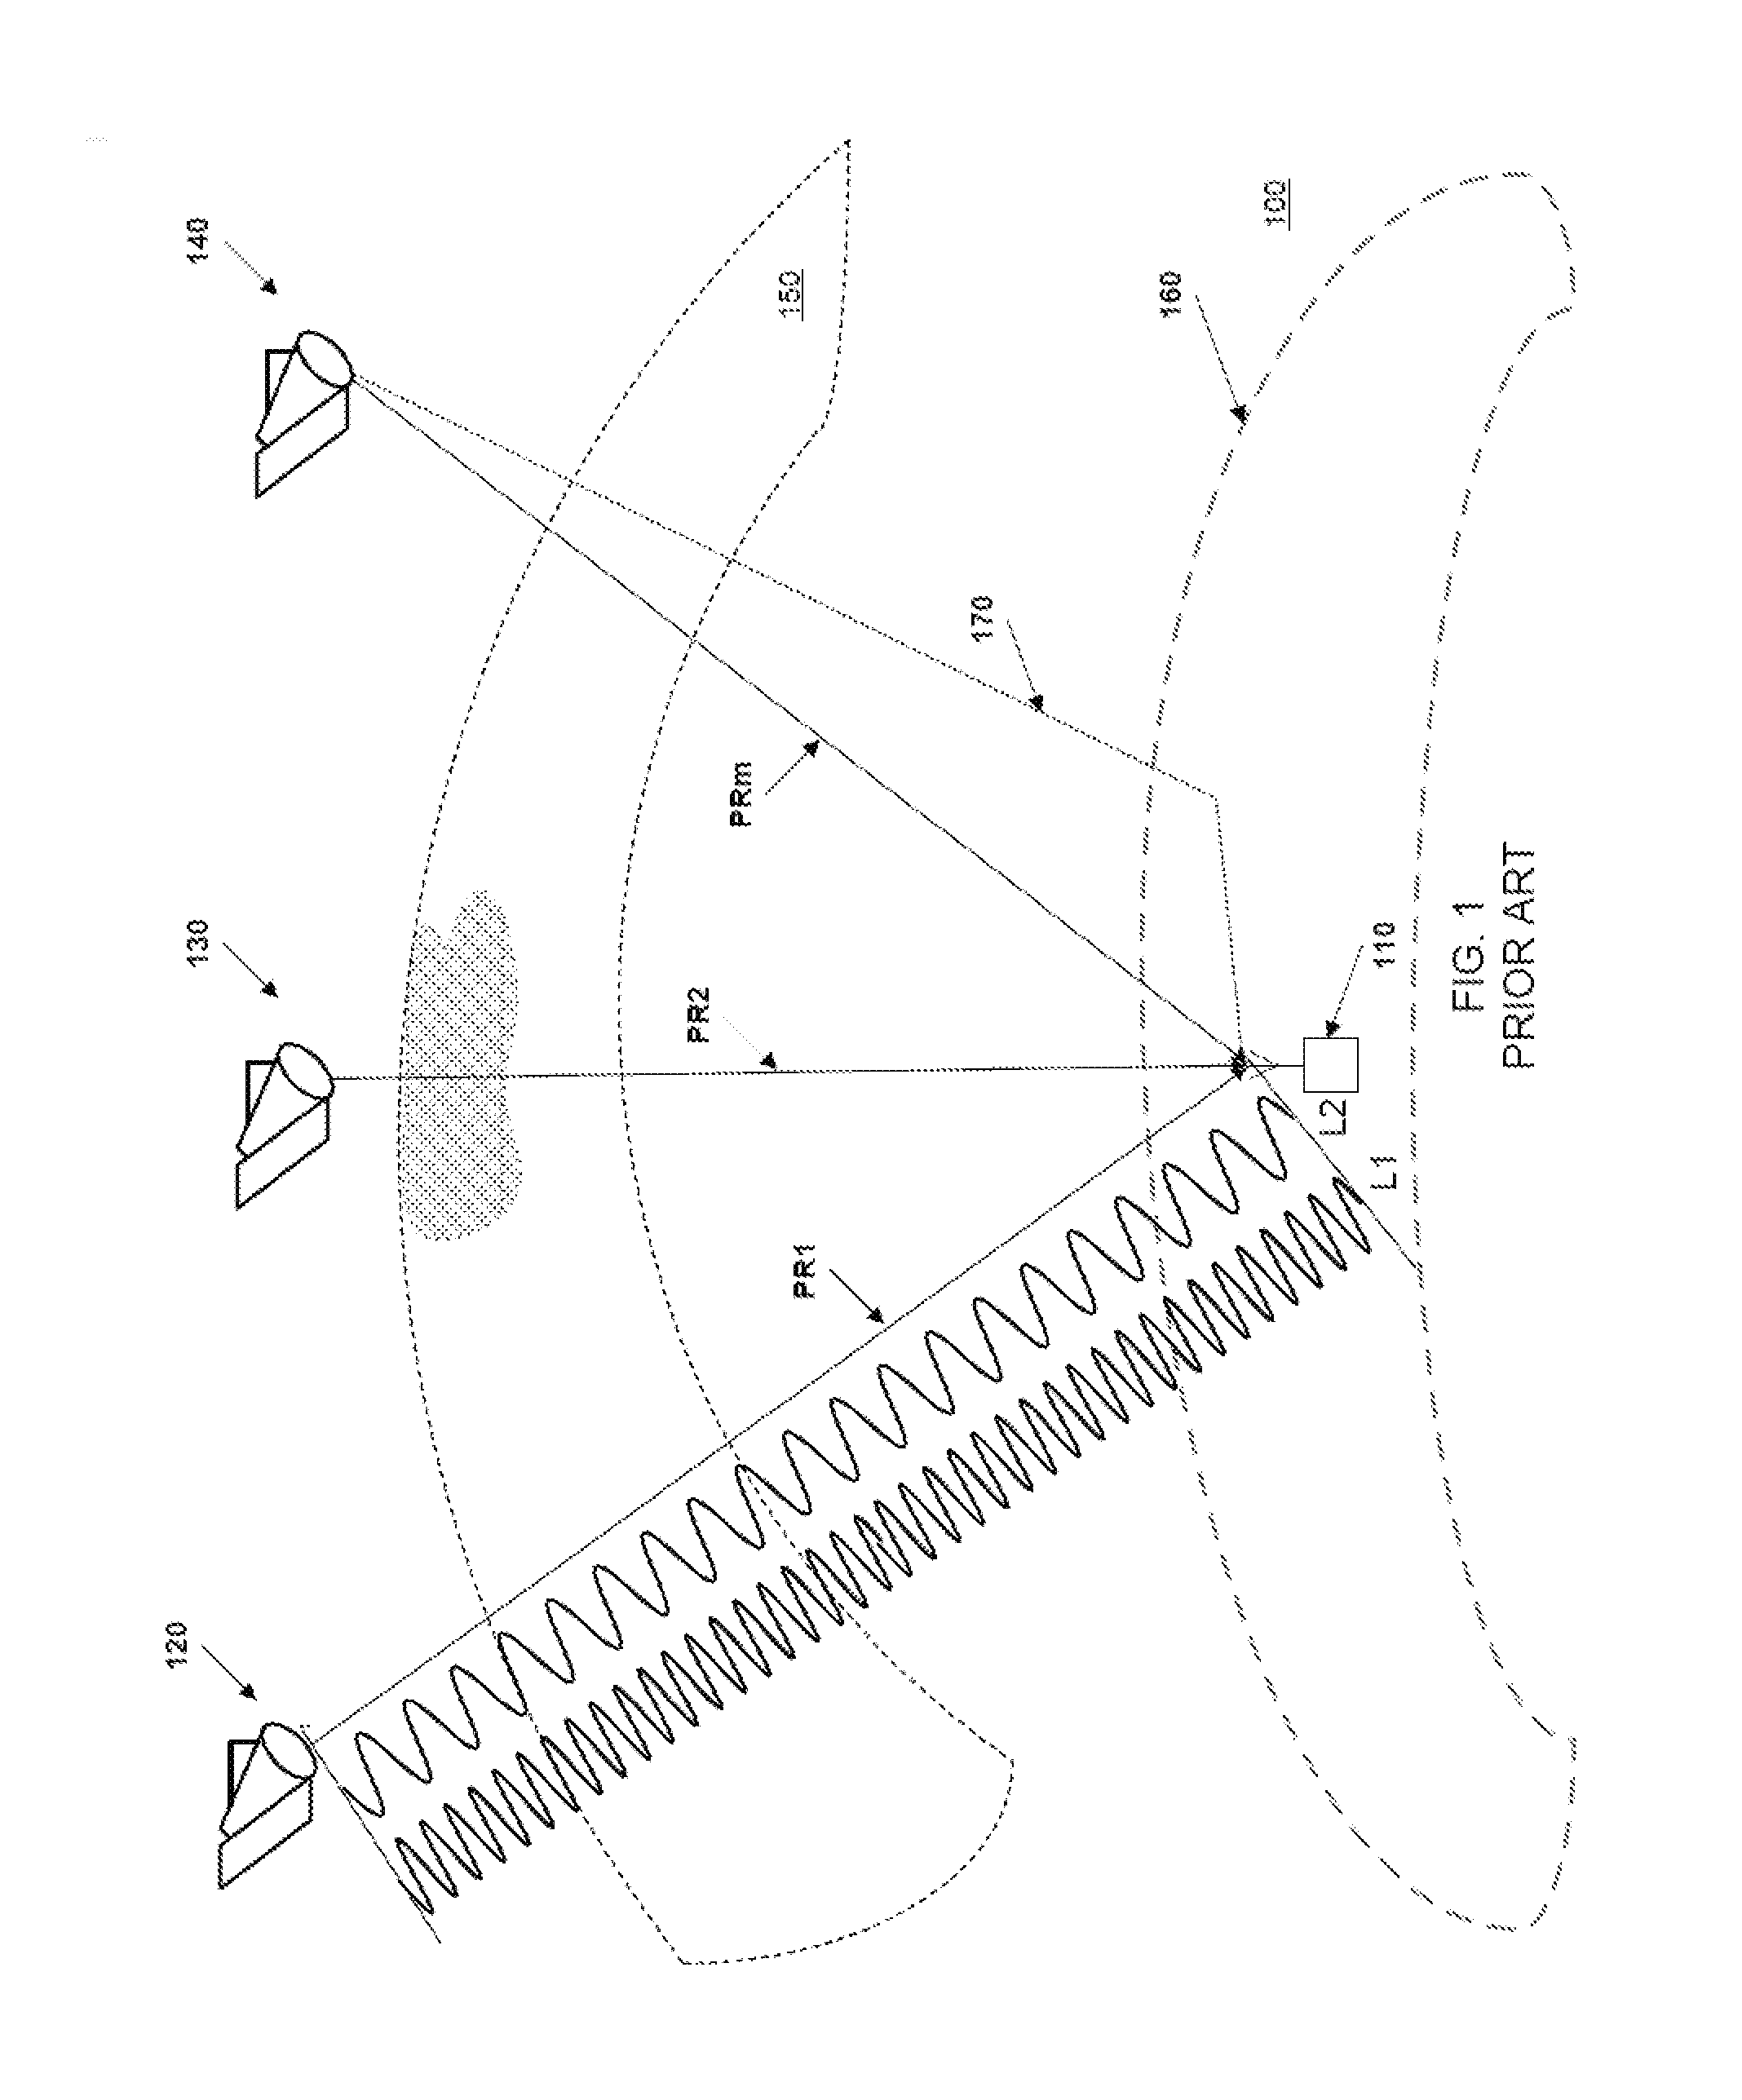 Methods for generating accuracy information on an ionosphere model for satellite navigation applications